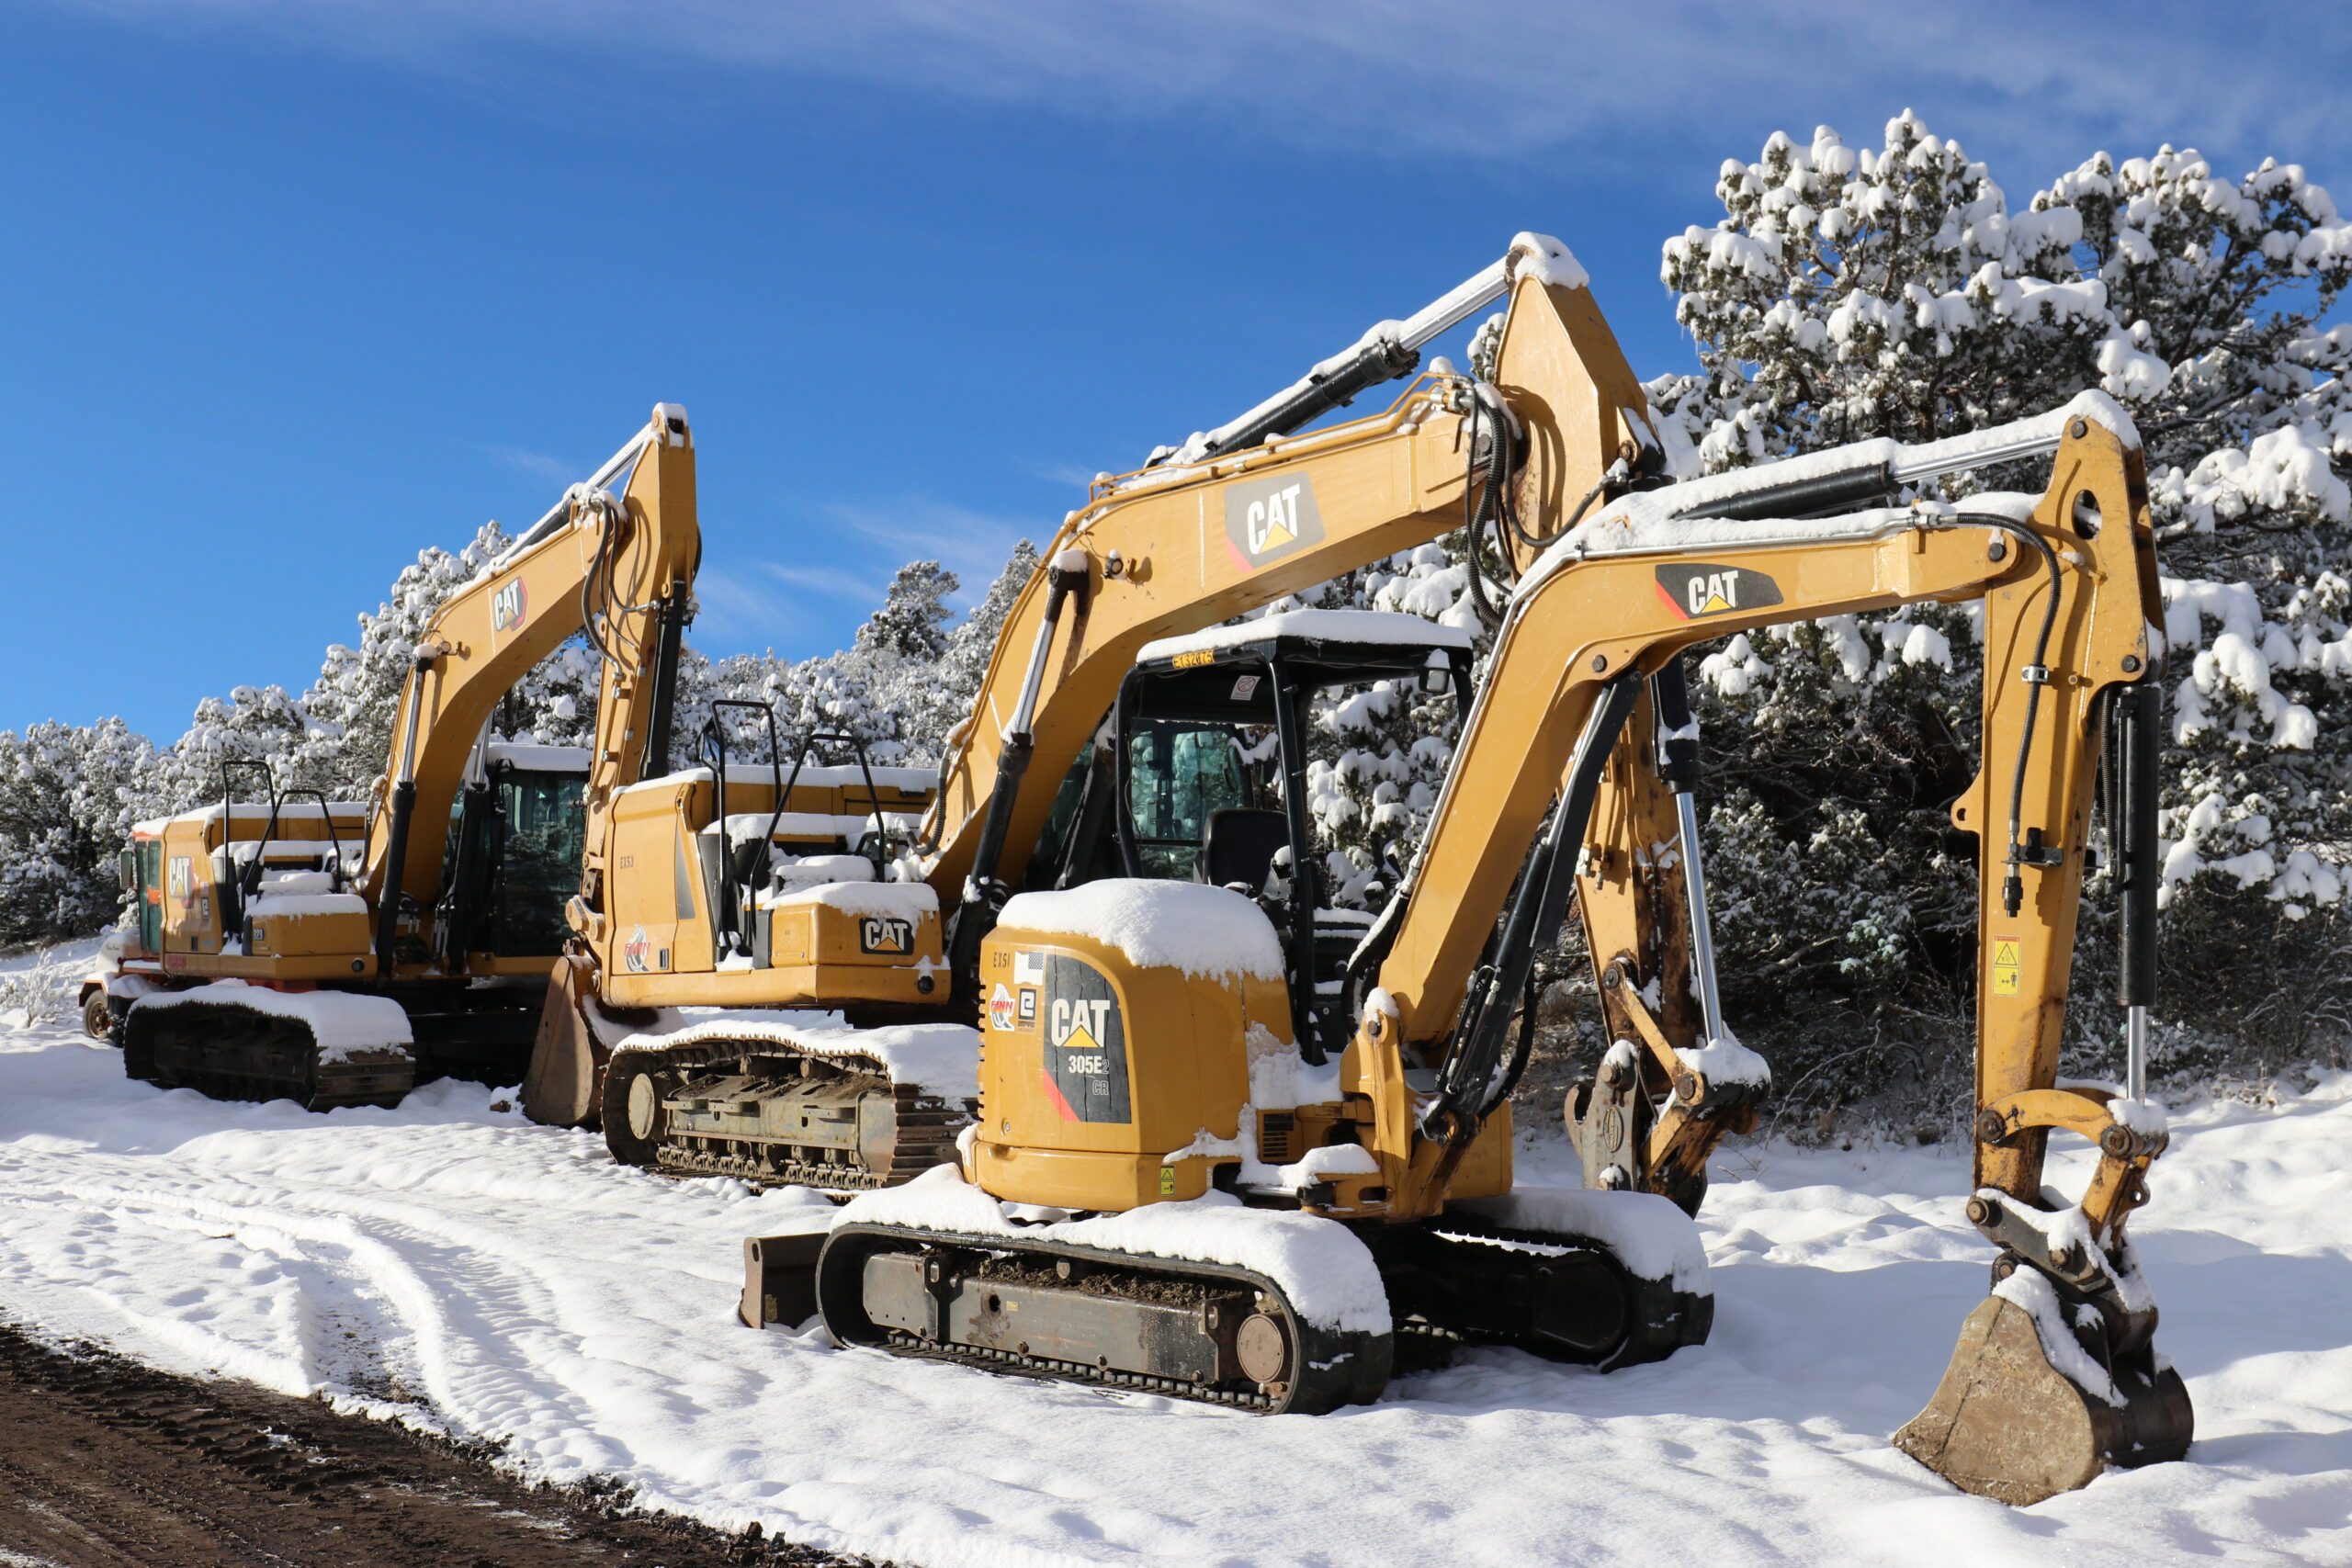 Caterpillar excavators parked on a snowy road.